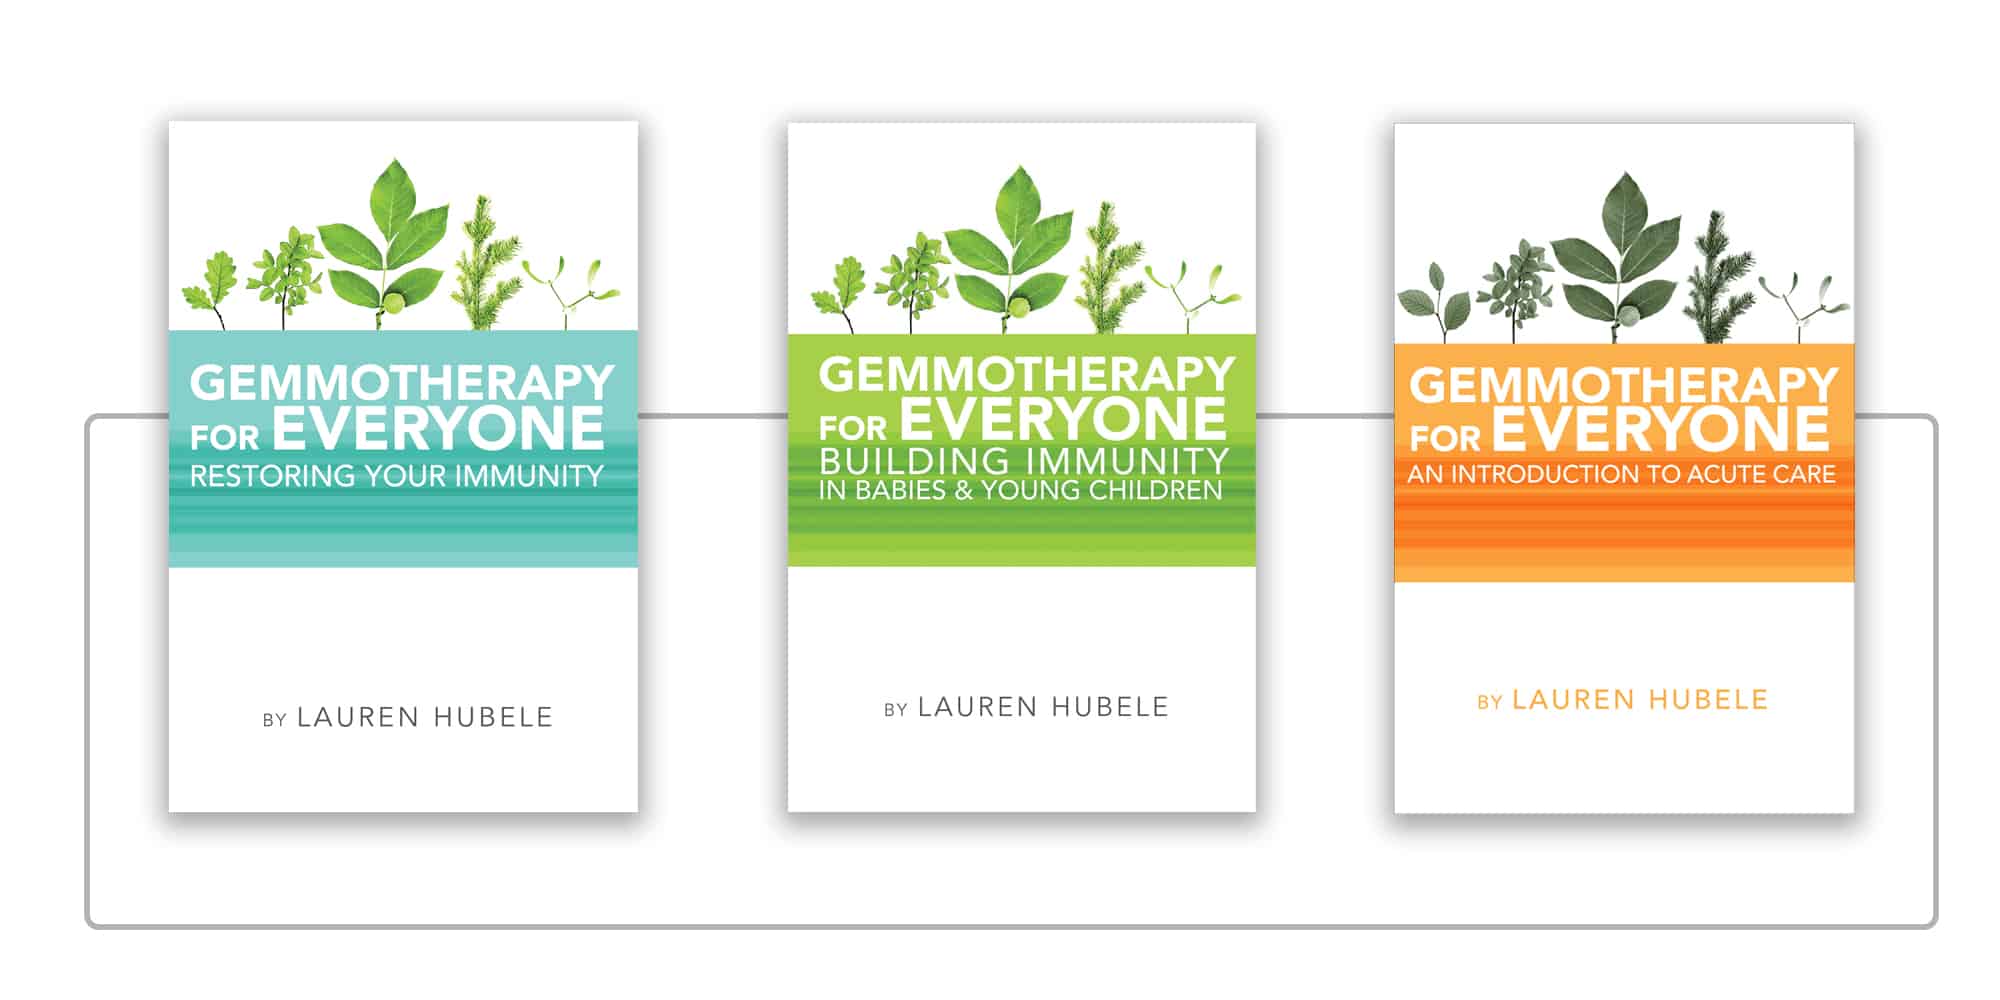 a collection of lauren hubele's books on gemmotherapy